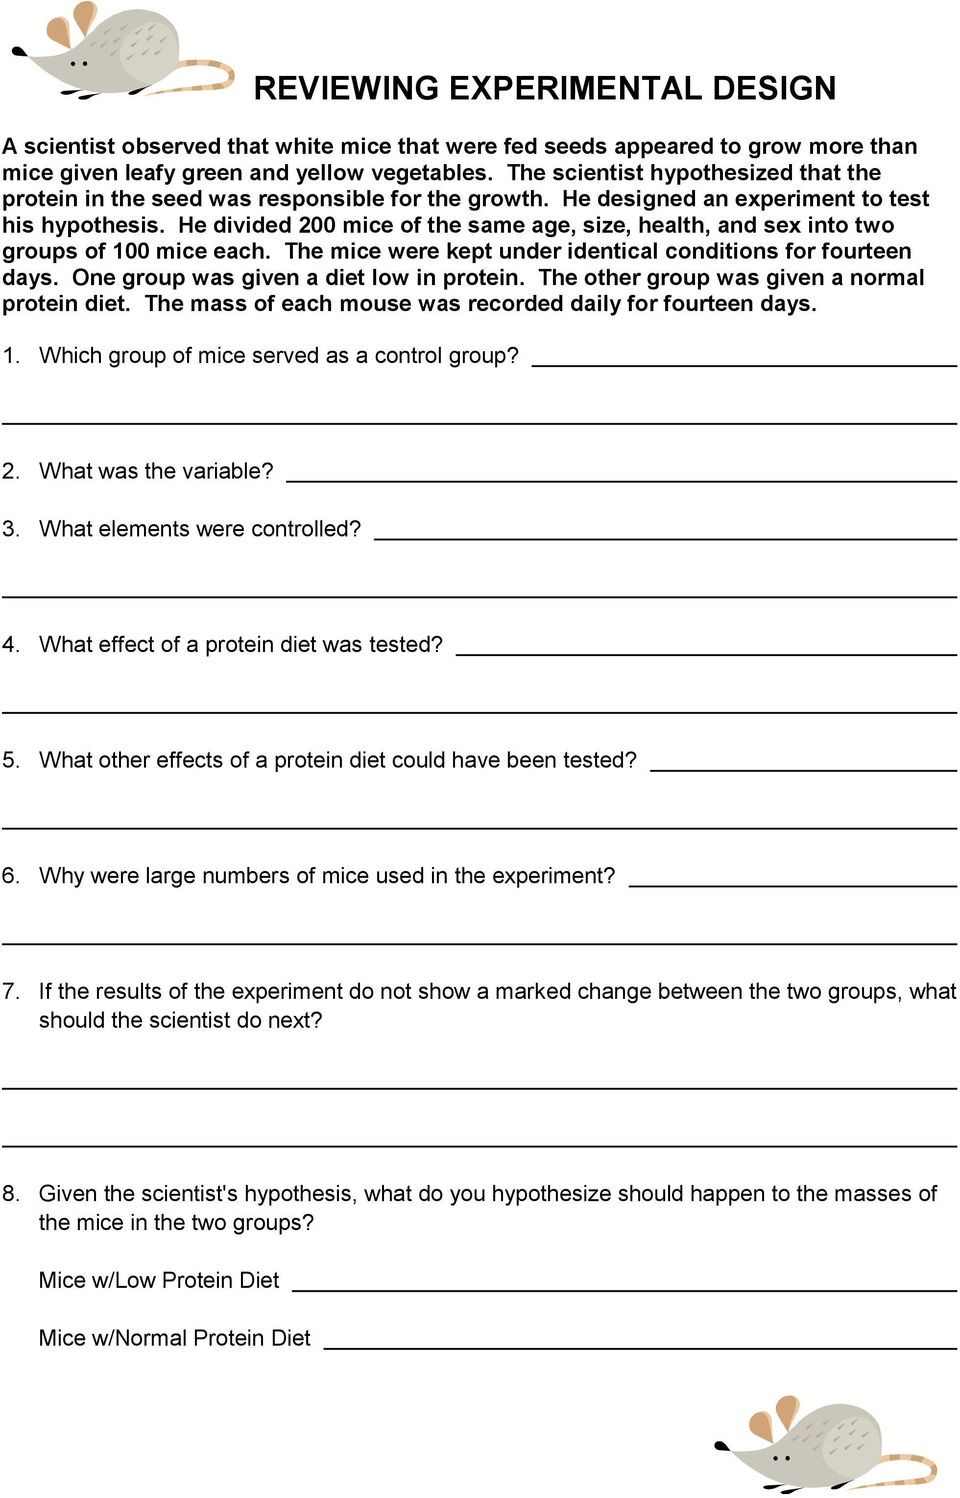 Designing An Experiment Worksheet the Scientific Method Pdf Free Download